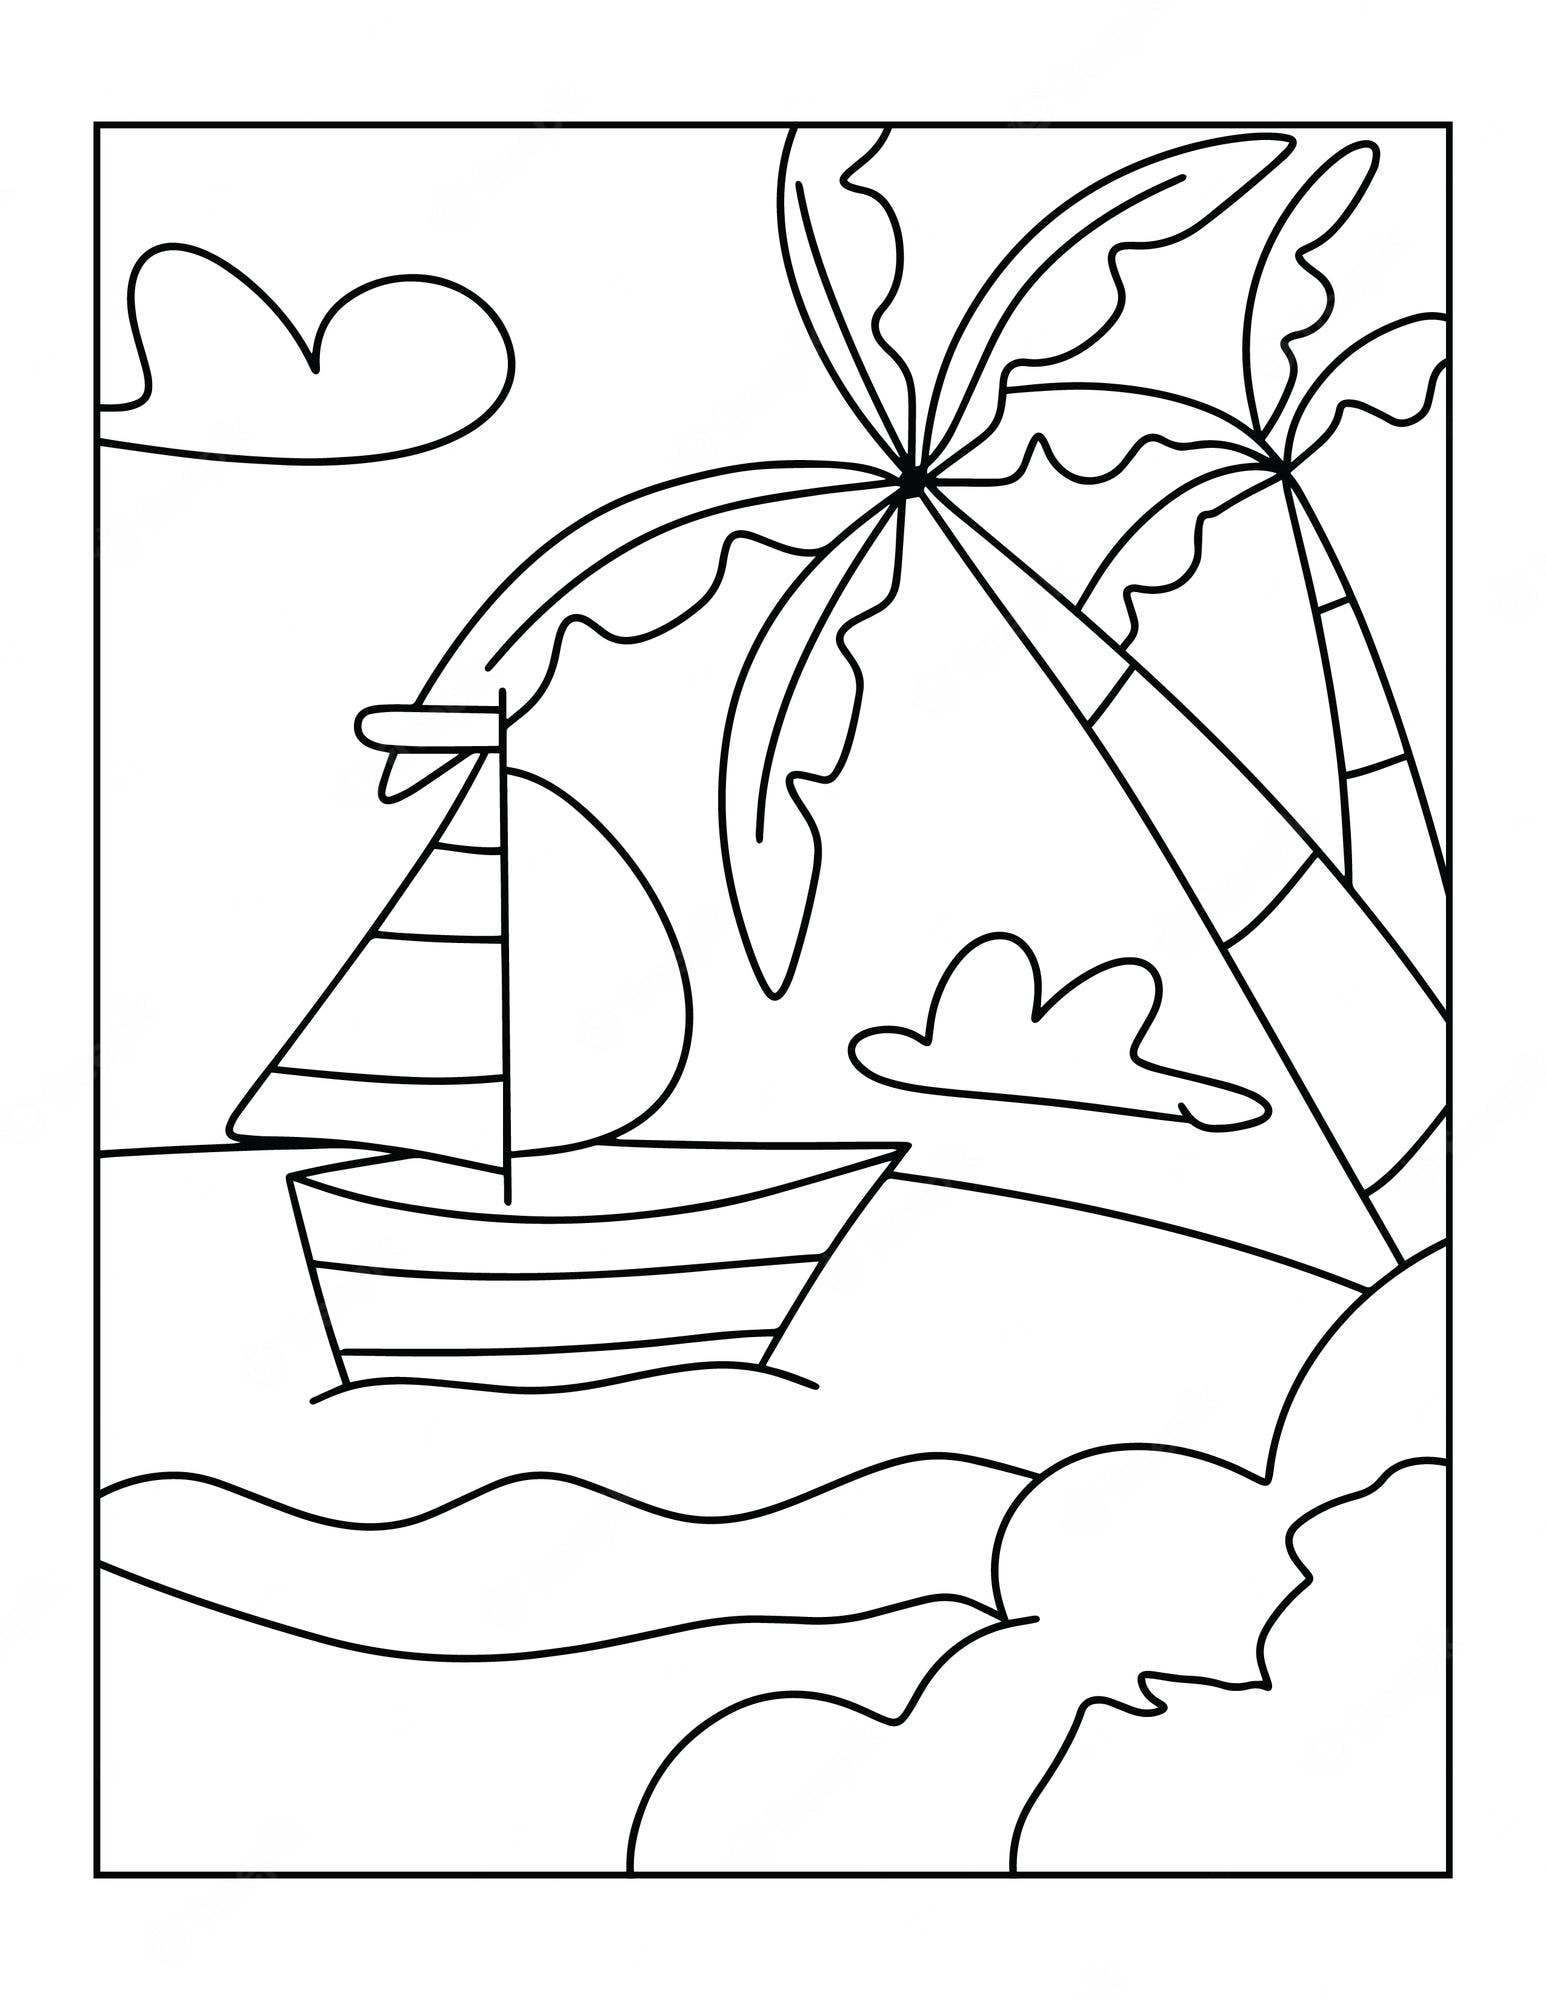 Premium Vector | Hello summer coloring pages for kids - summer coloring book